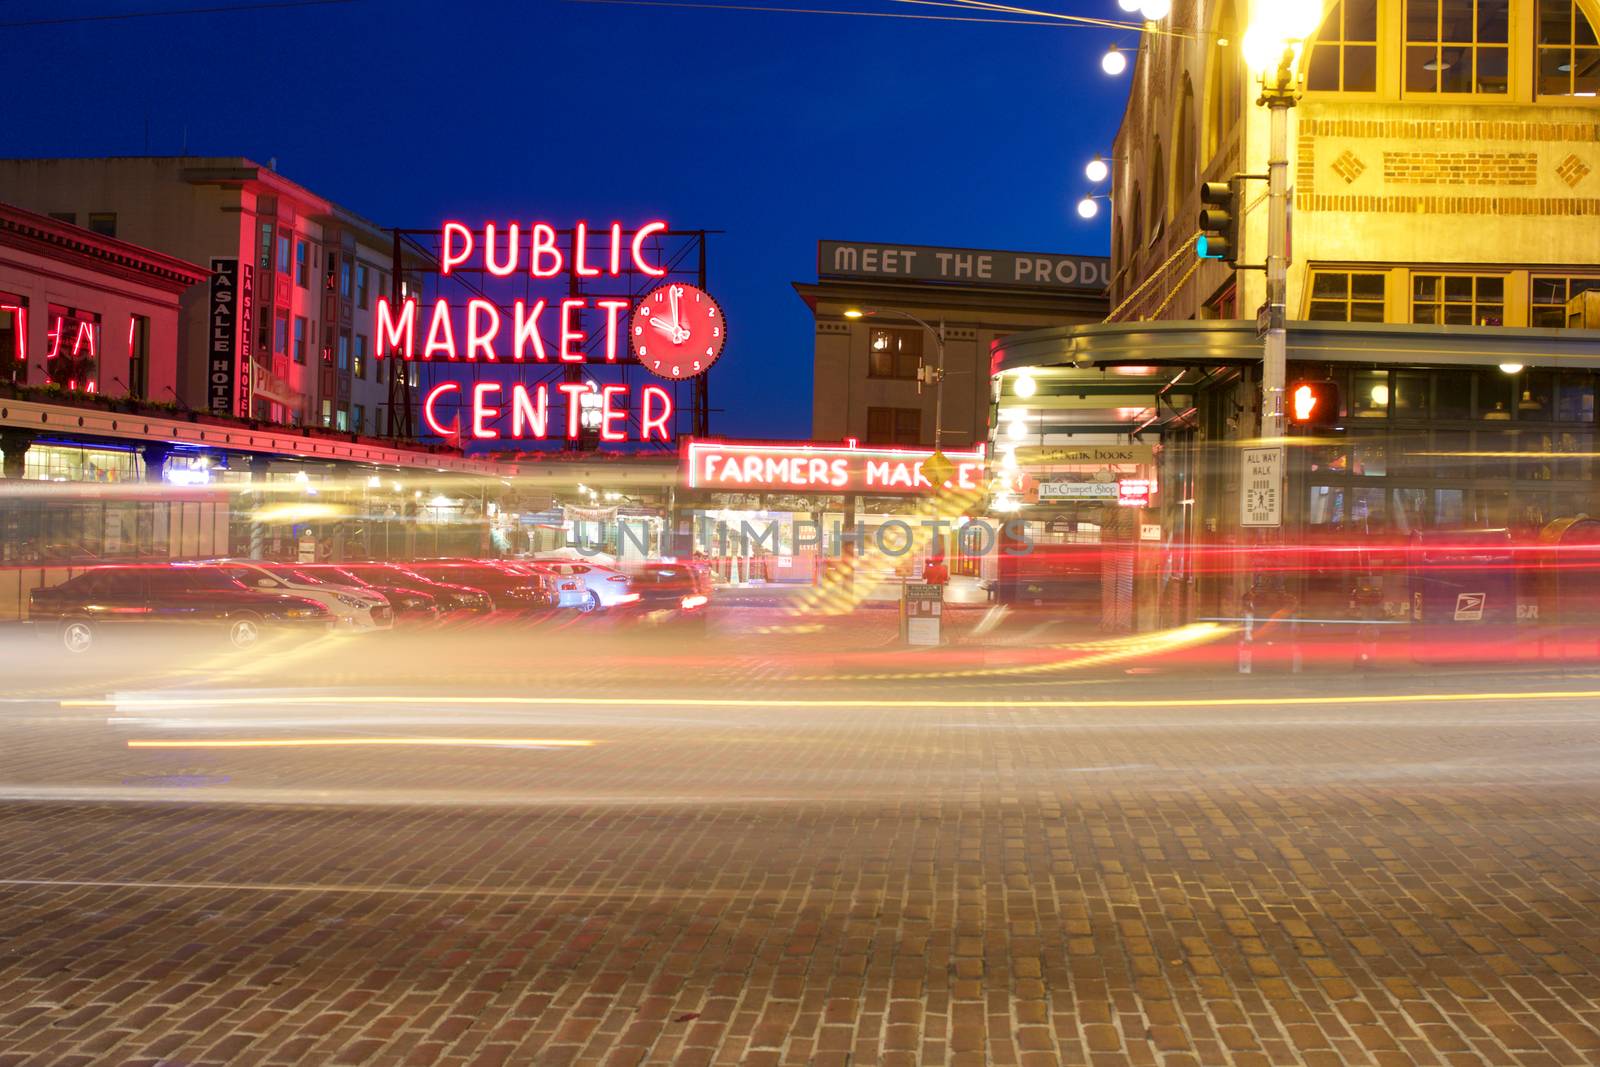 Pike Place Public Market Center Sign at Night by jhlemmer